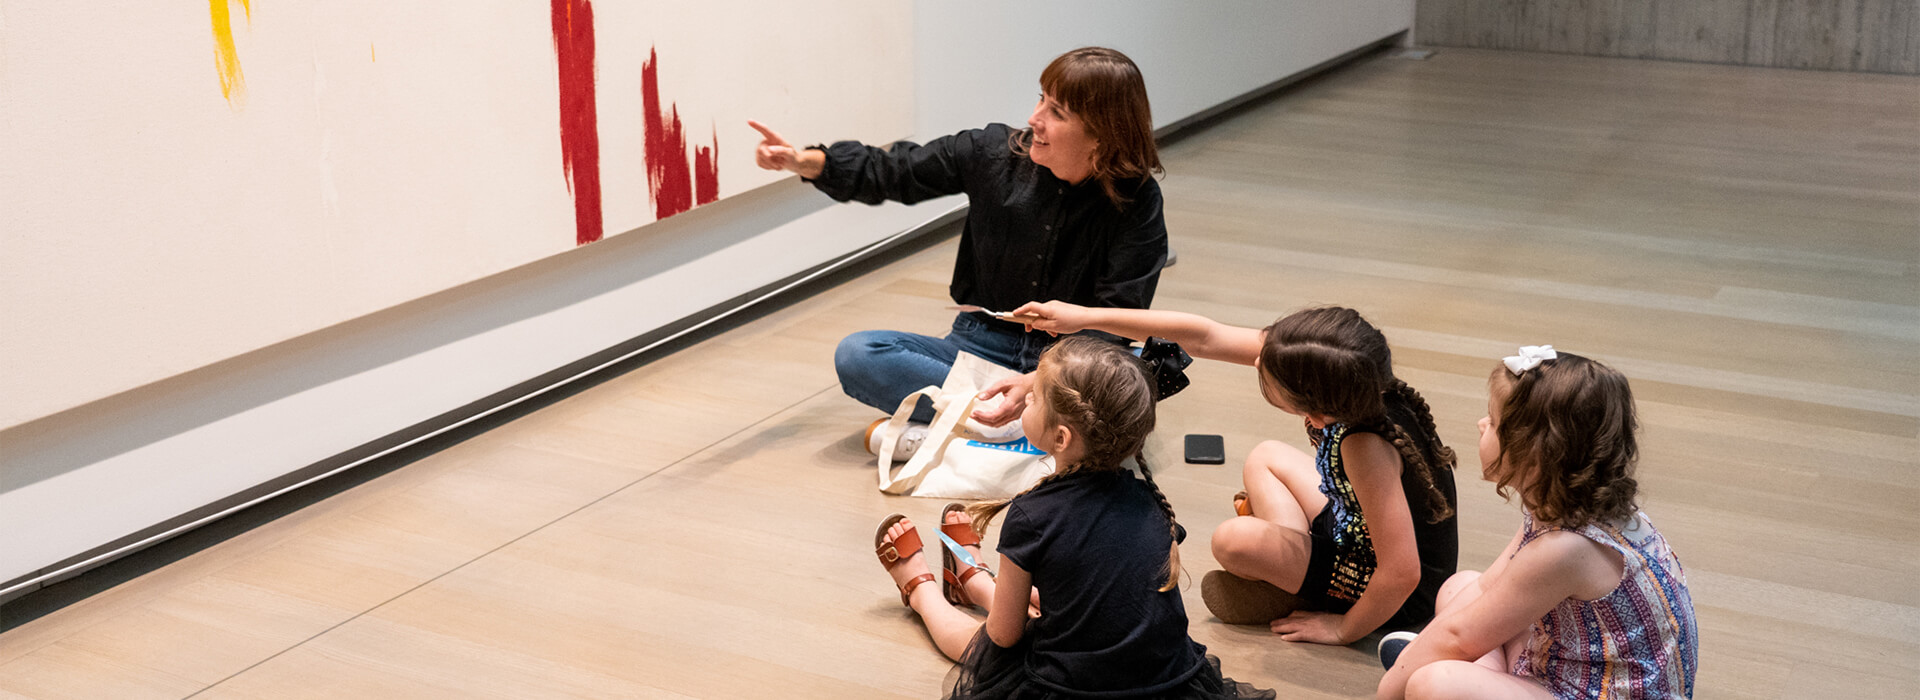 A teacher sits with three young girls on the floor in front of a painting and they point at a spot on the painting